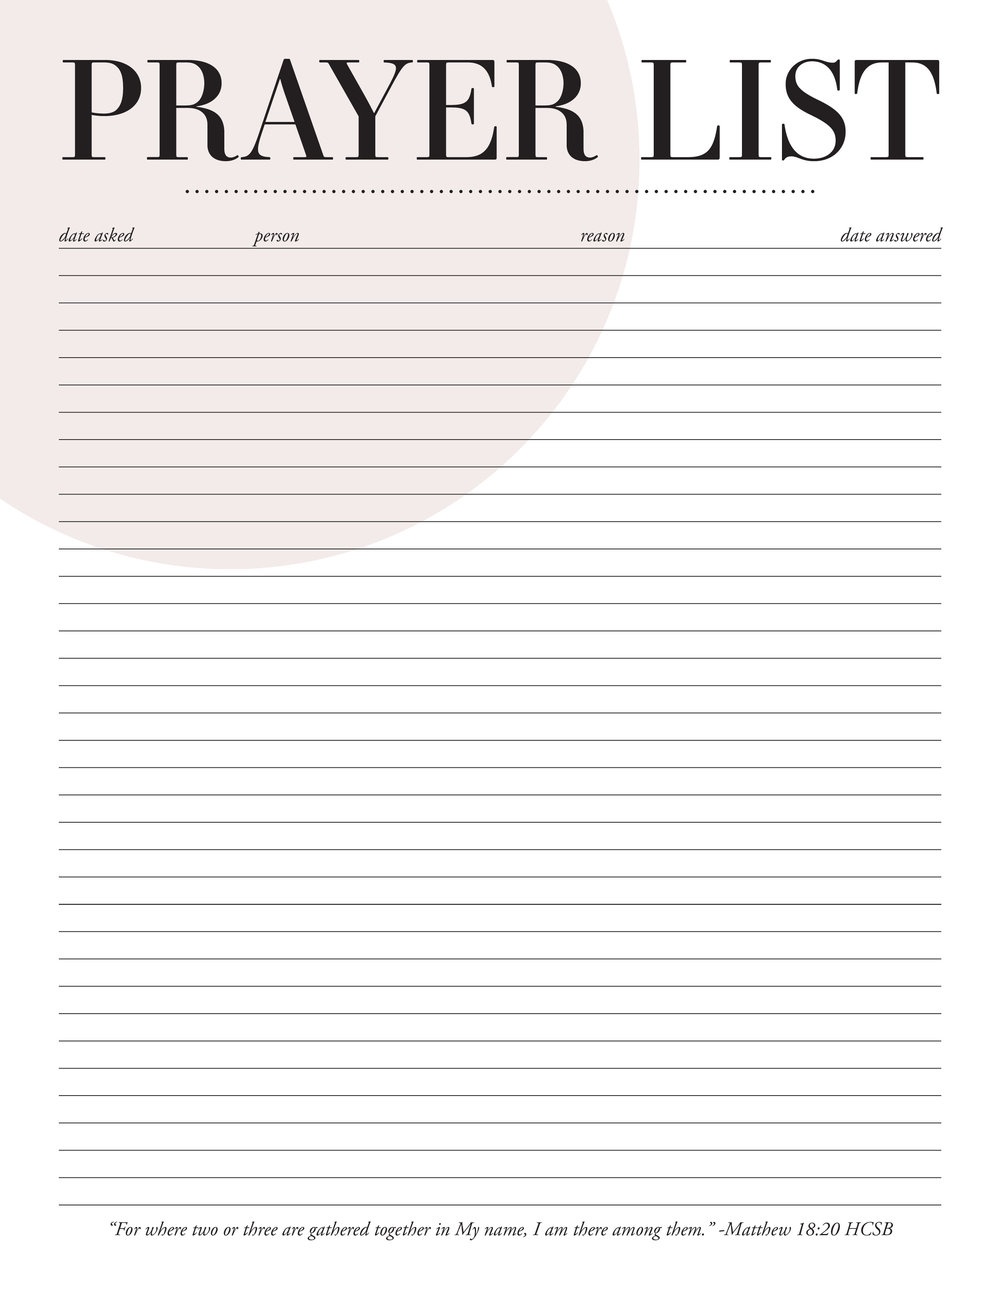 Printable Prayer List (76+ Images In Collection) Page 1 - Free Printable Prayer List